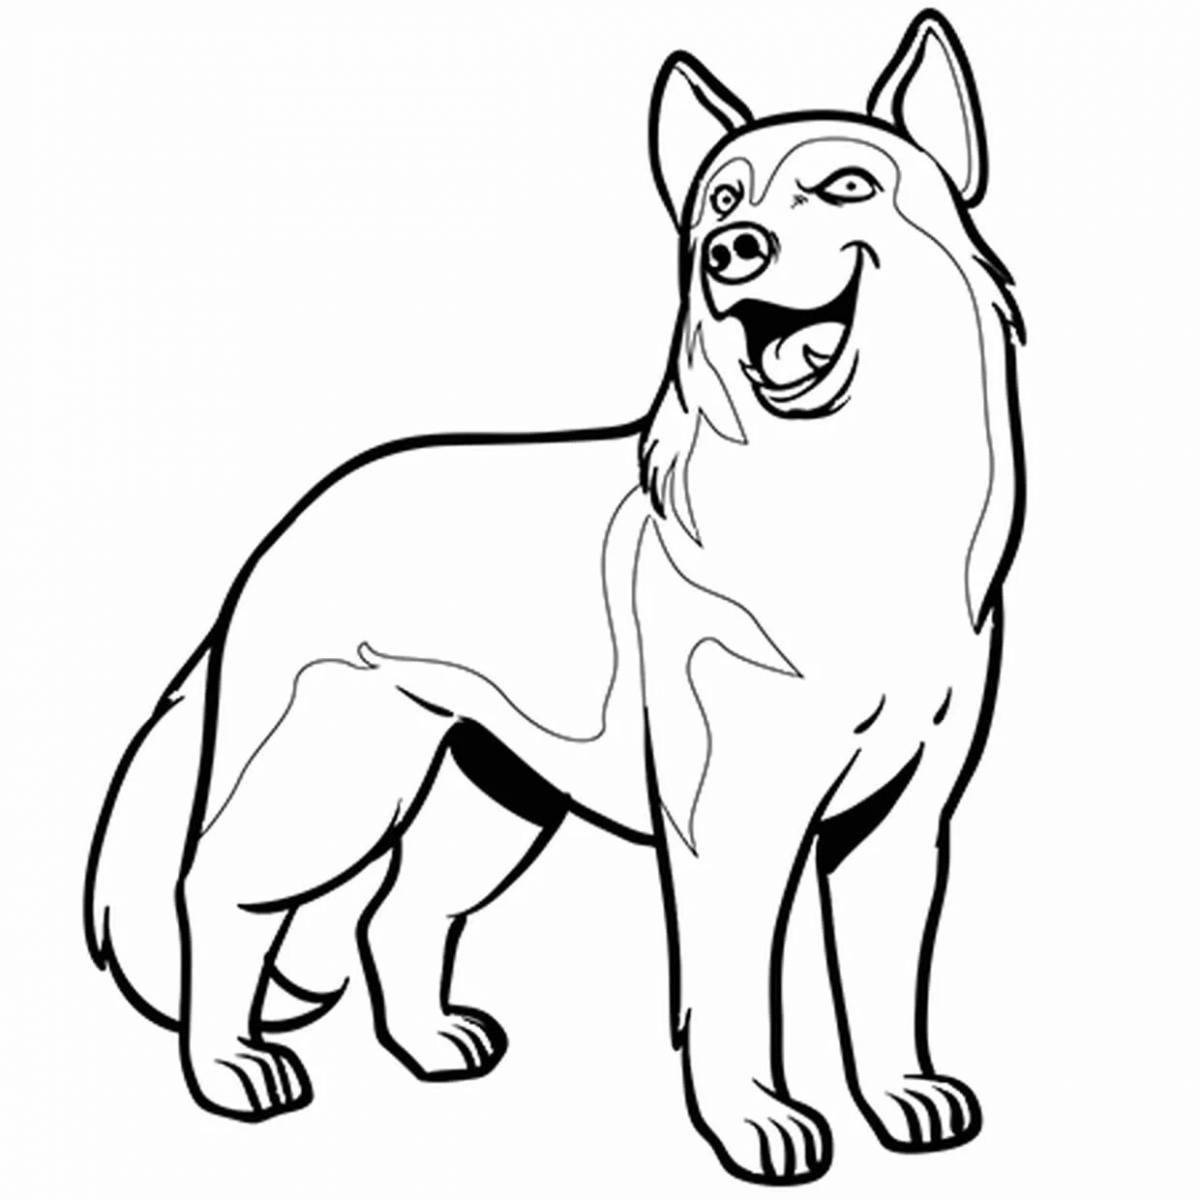 Husky friendly coloring book